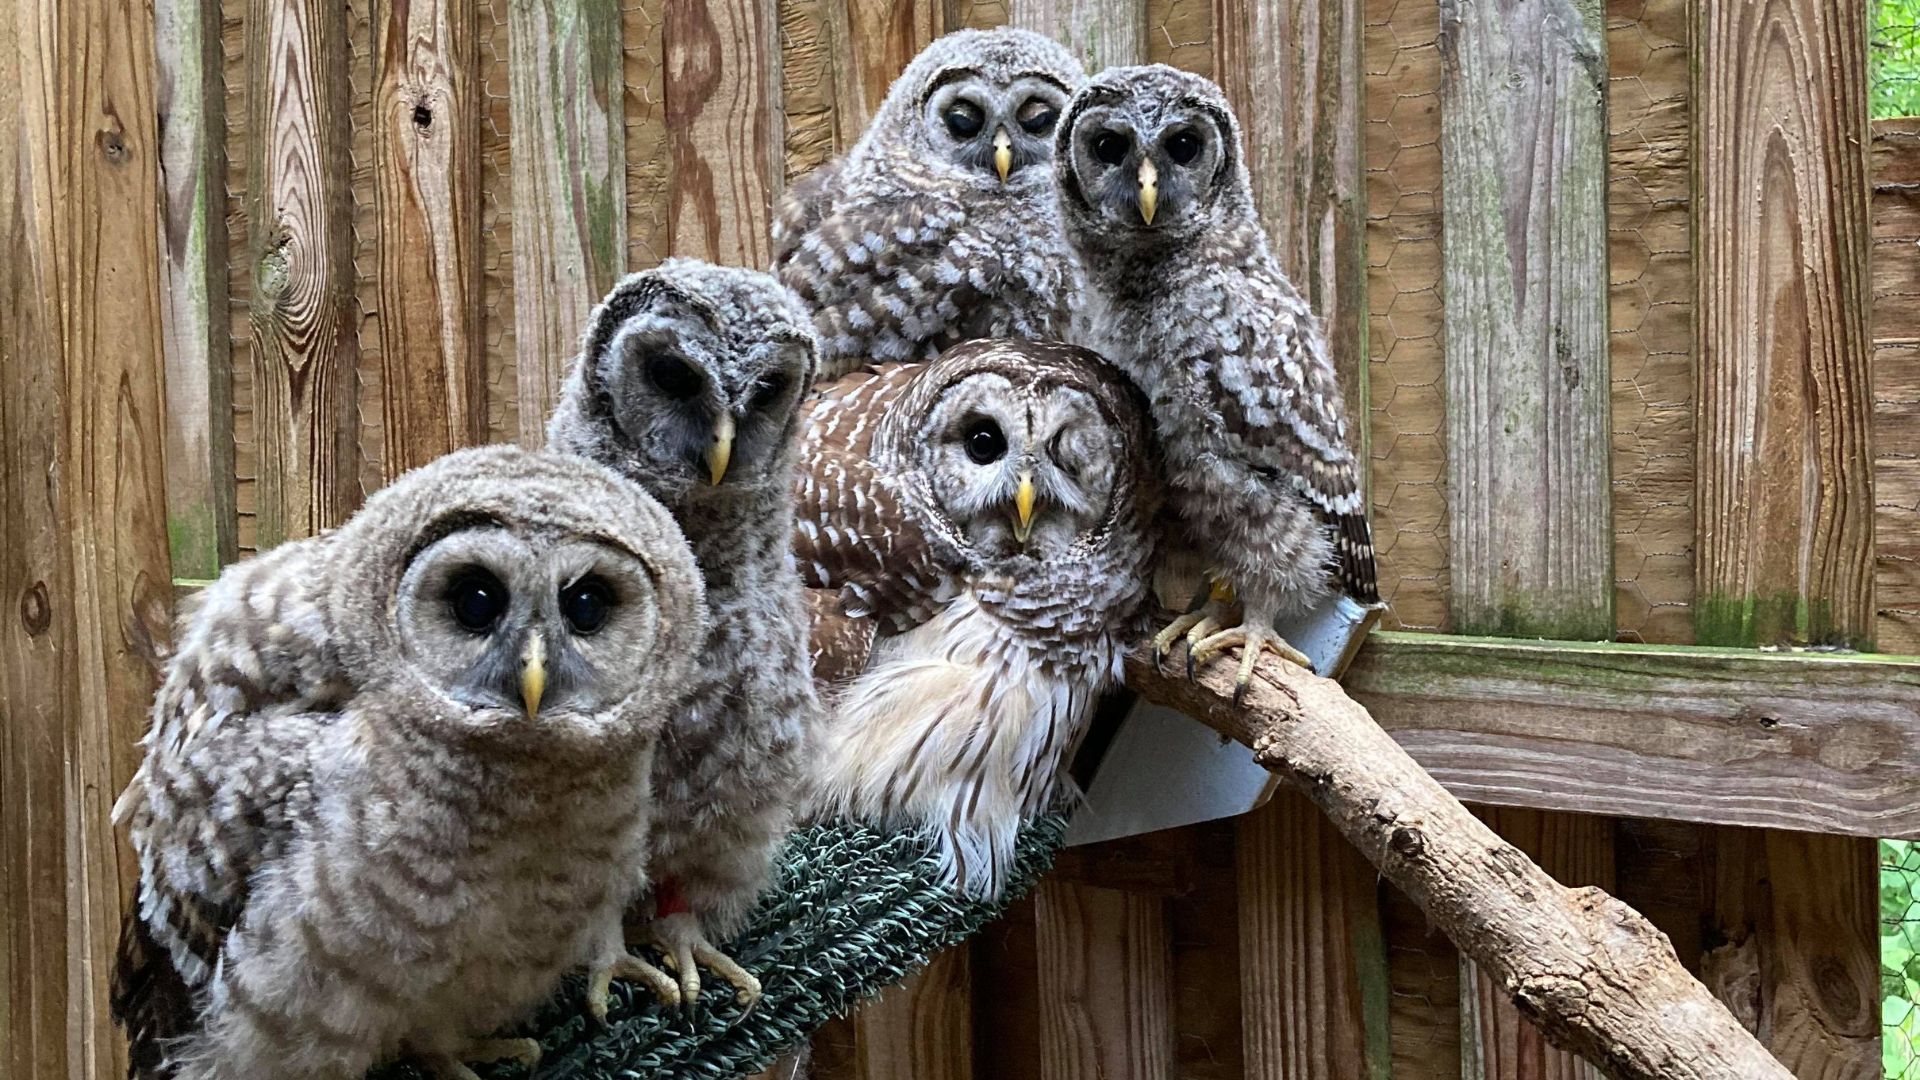 A group of owls pile on top of each other.